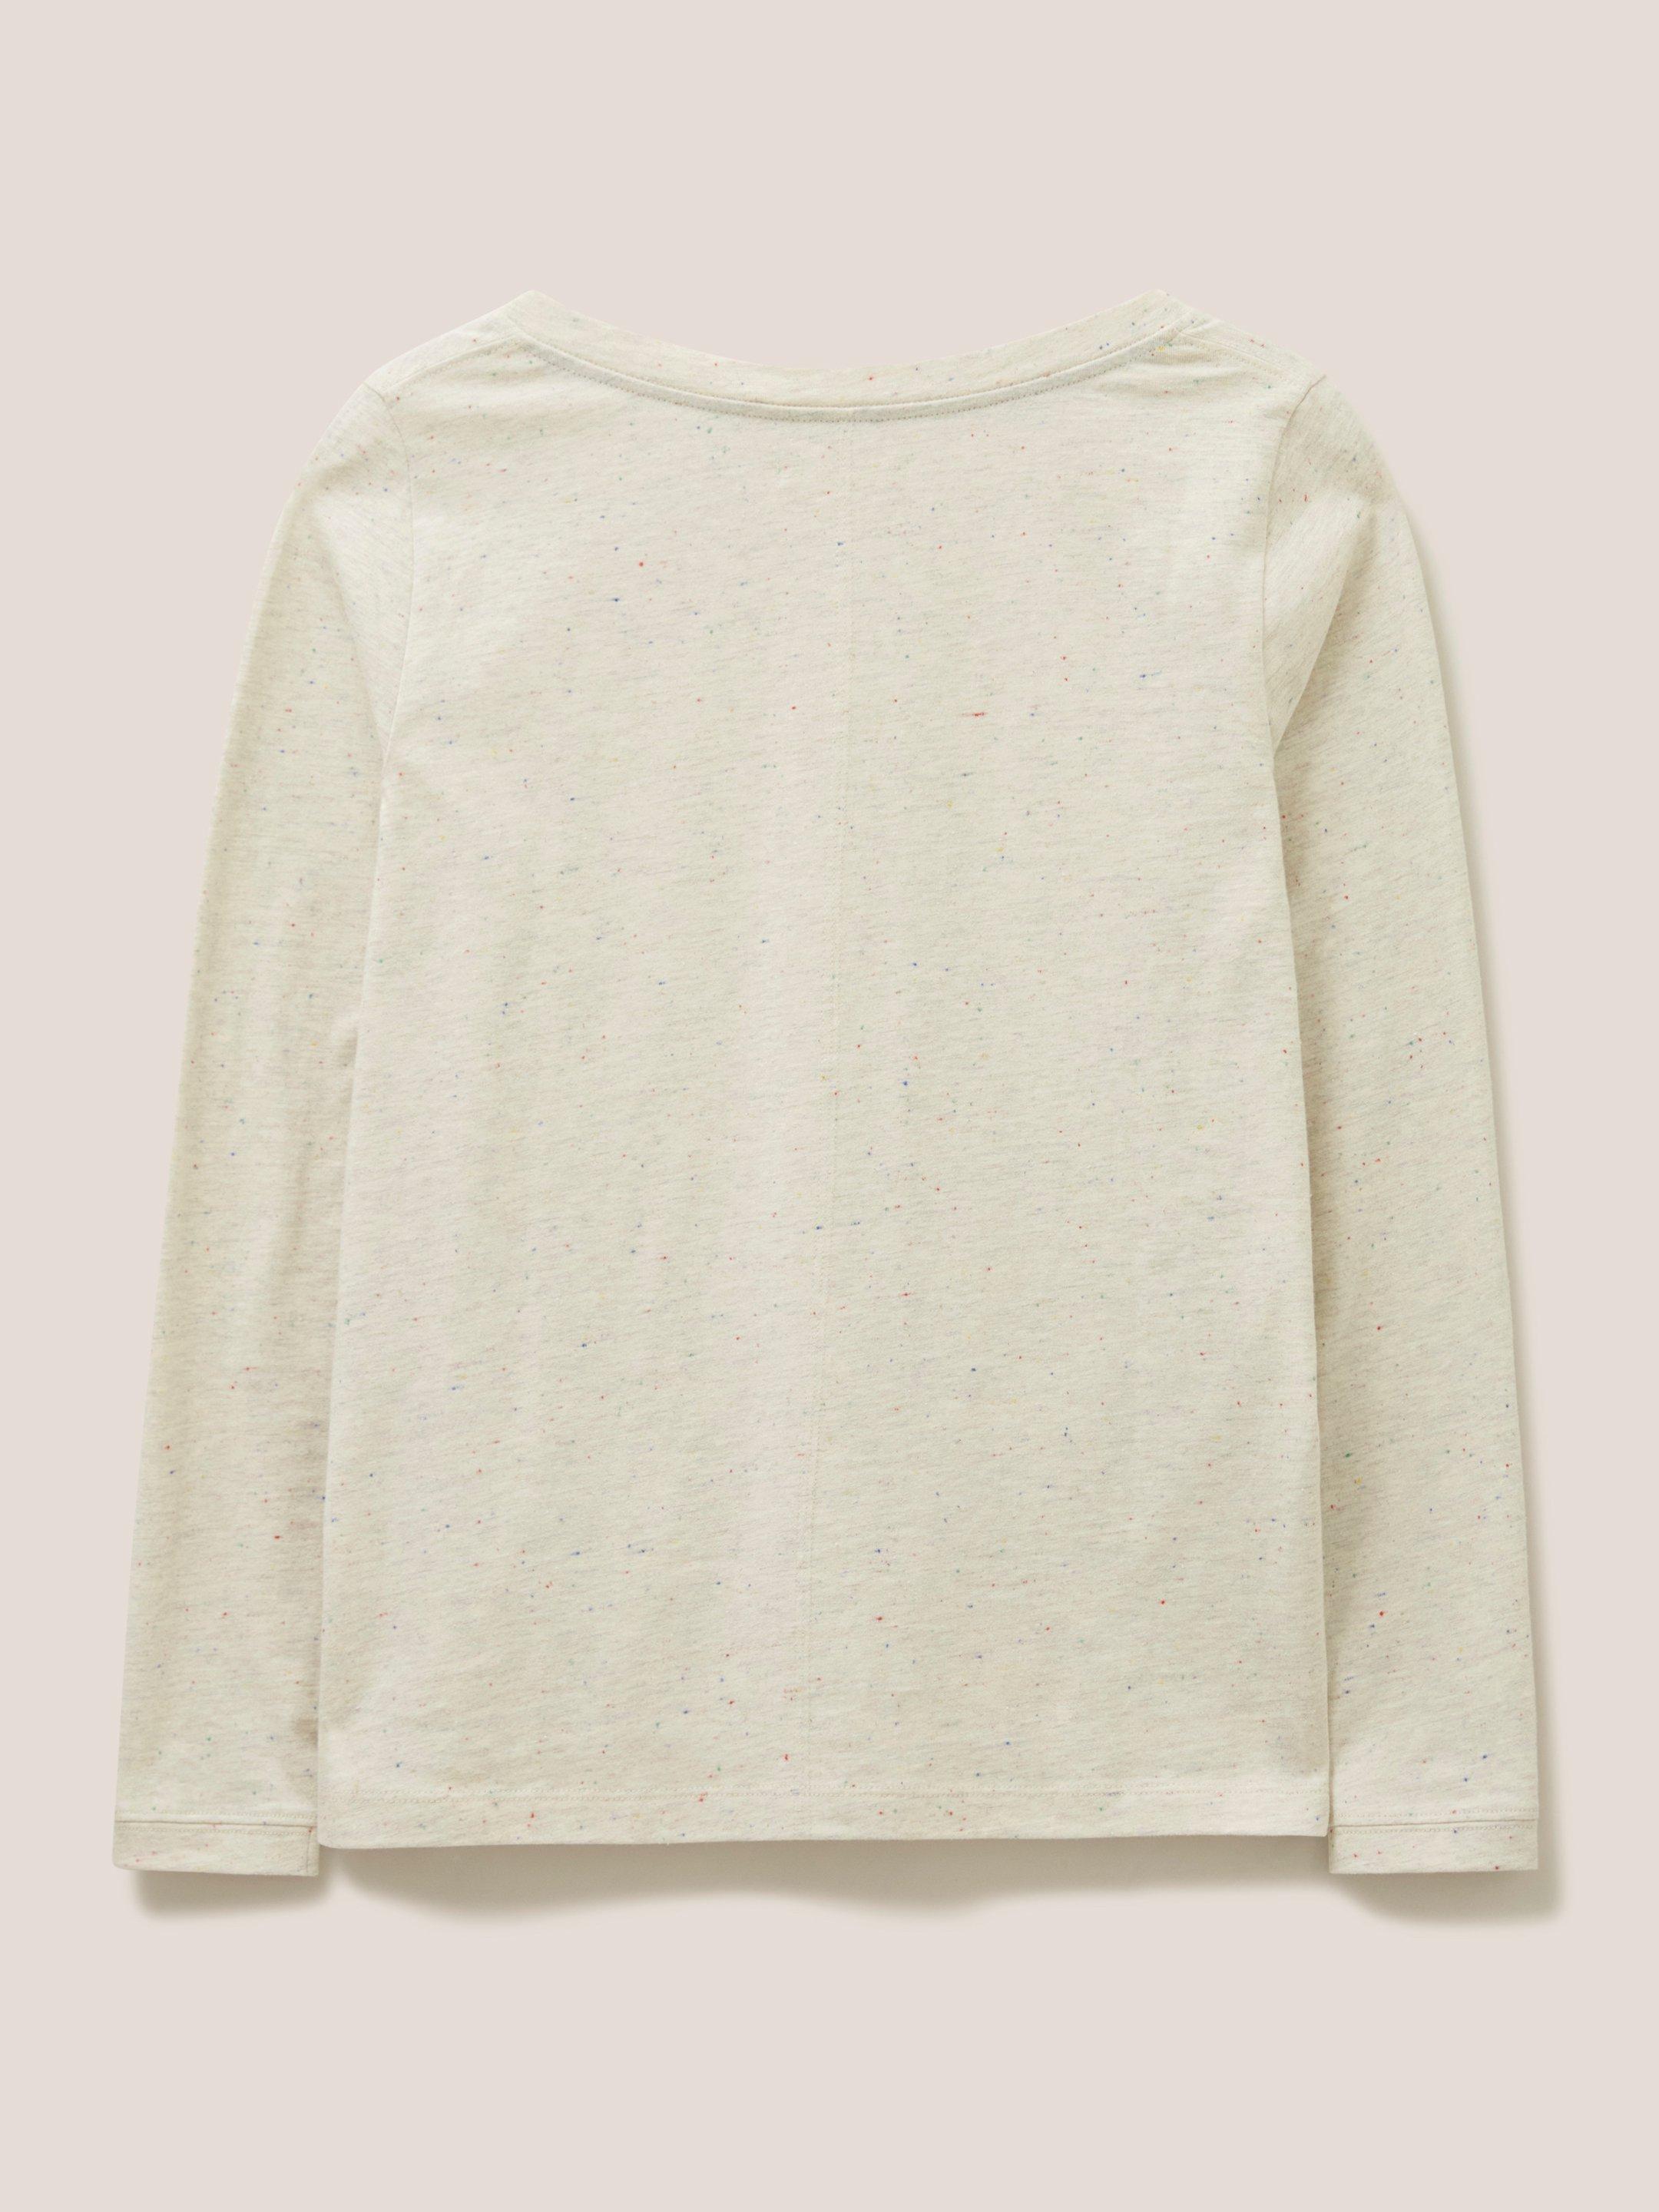 Nelly LS Tee in LGT NAT - FLAT BACK